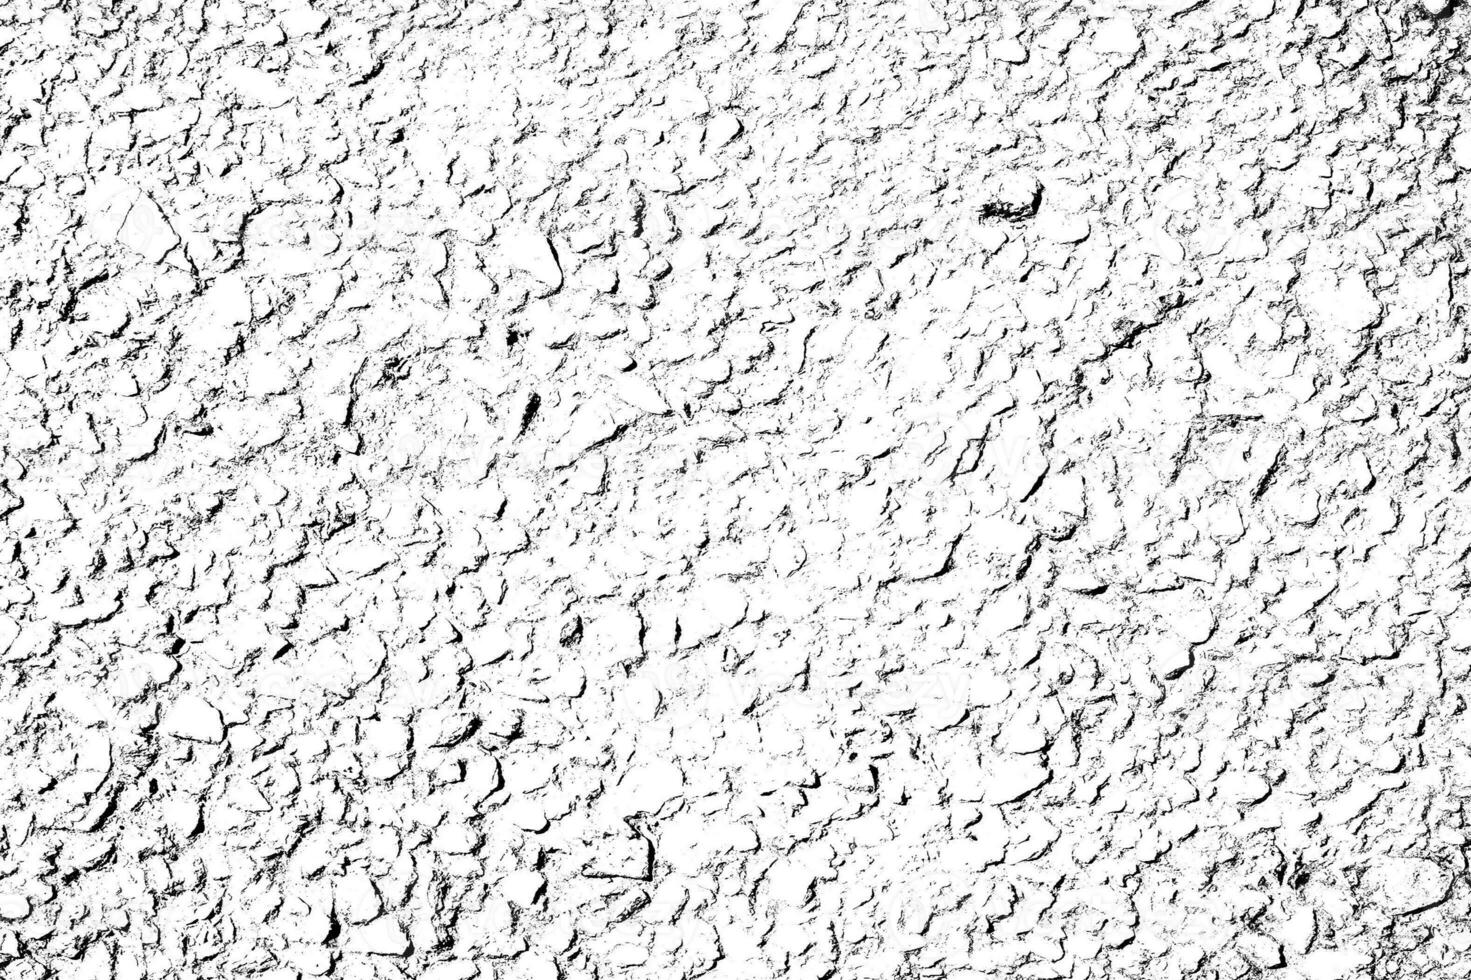 Abstract grunge black and white distressed texture background photo